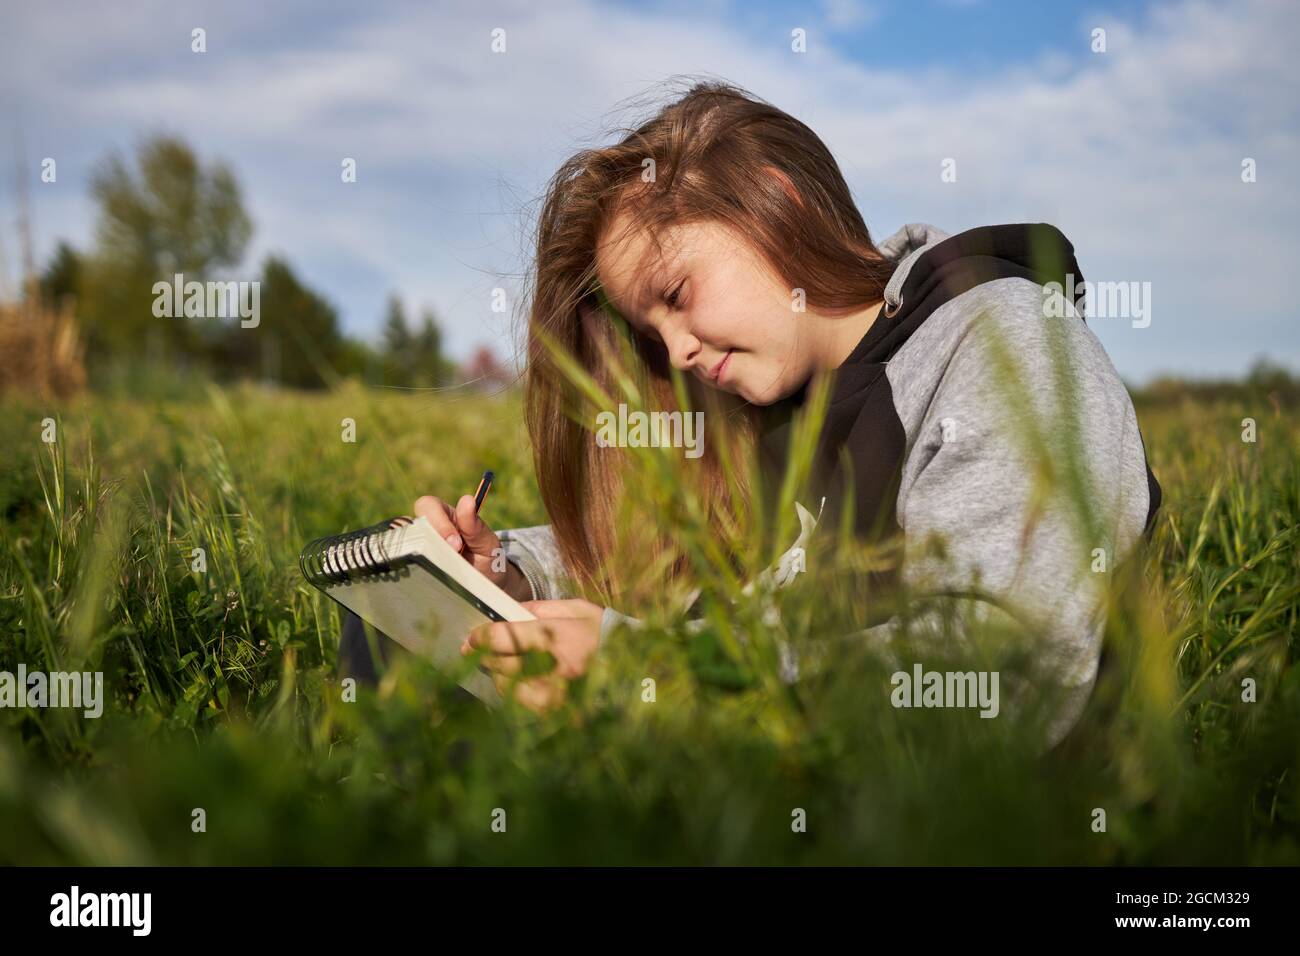 https://c8.alamy.com/comp/2GCM329/delighted-teen-girl-sitting-in-meadow-and-drawing-in-sketchbook-while-enjoying-sunny-day-in-countryside-2GCM329.jpg